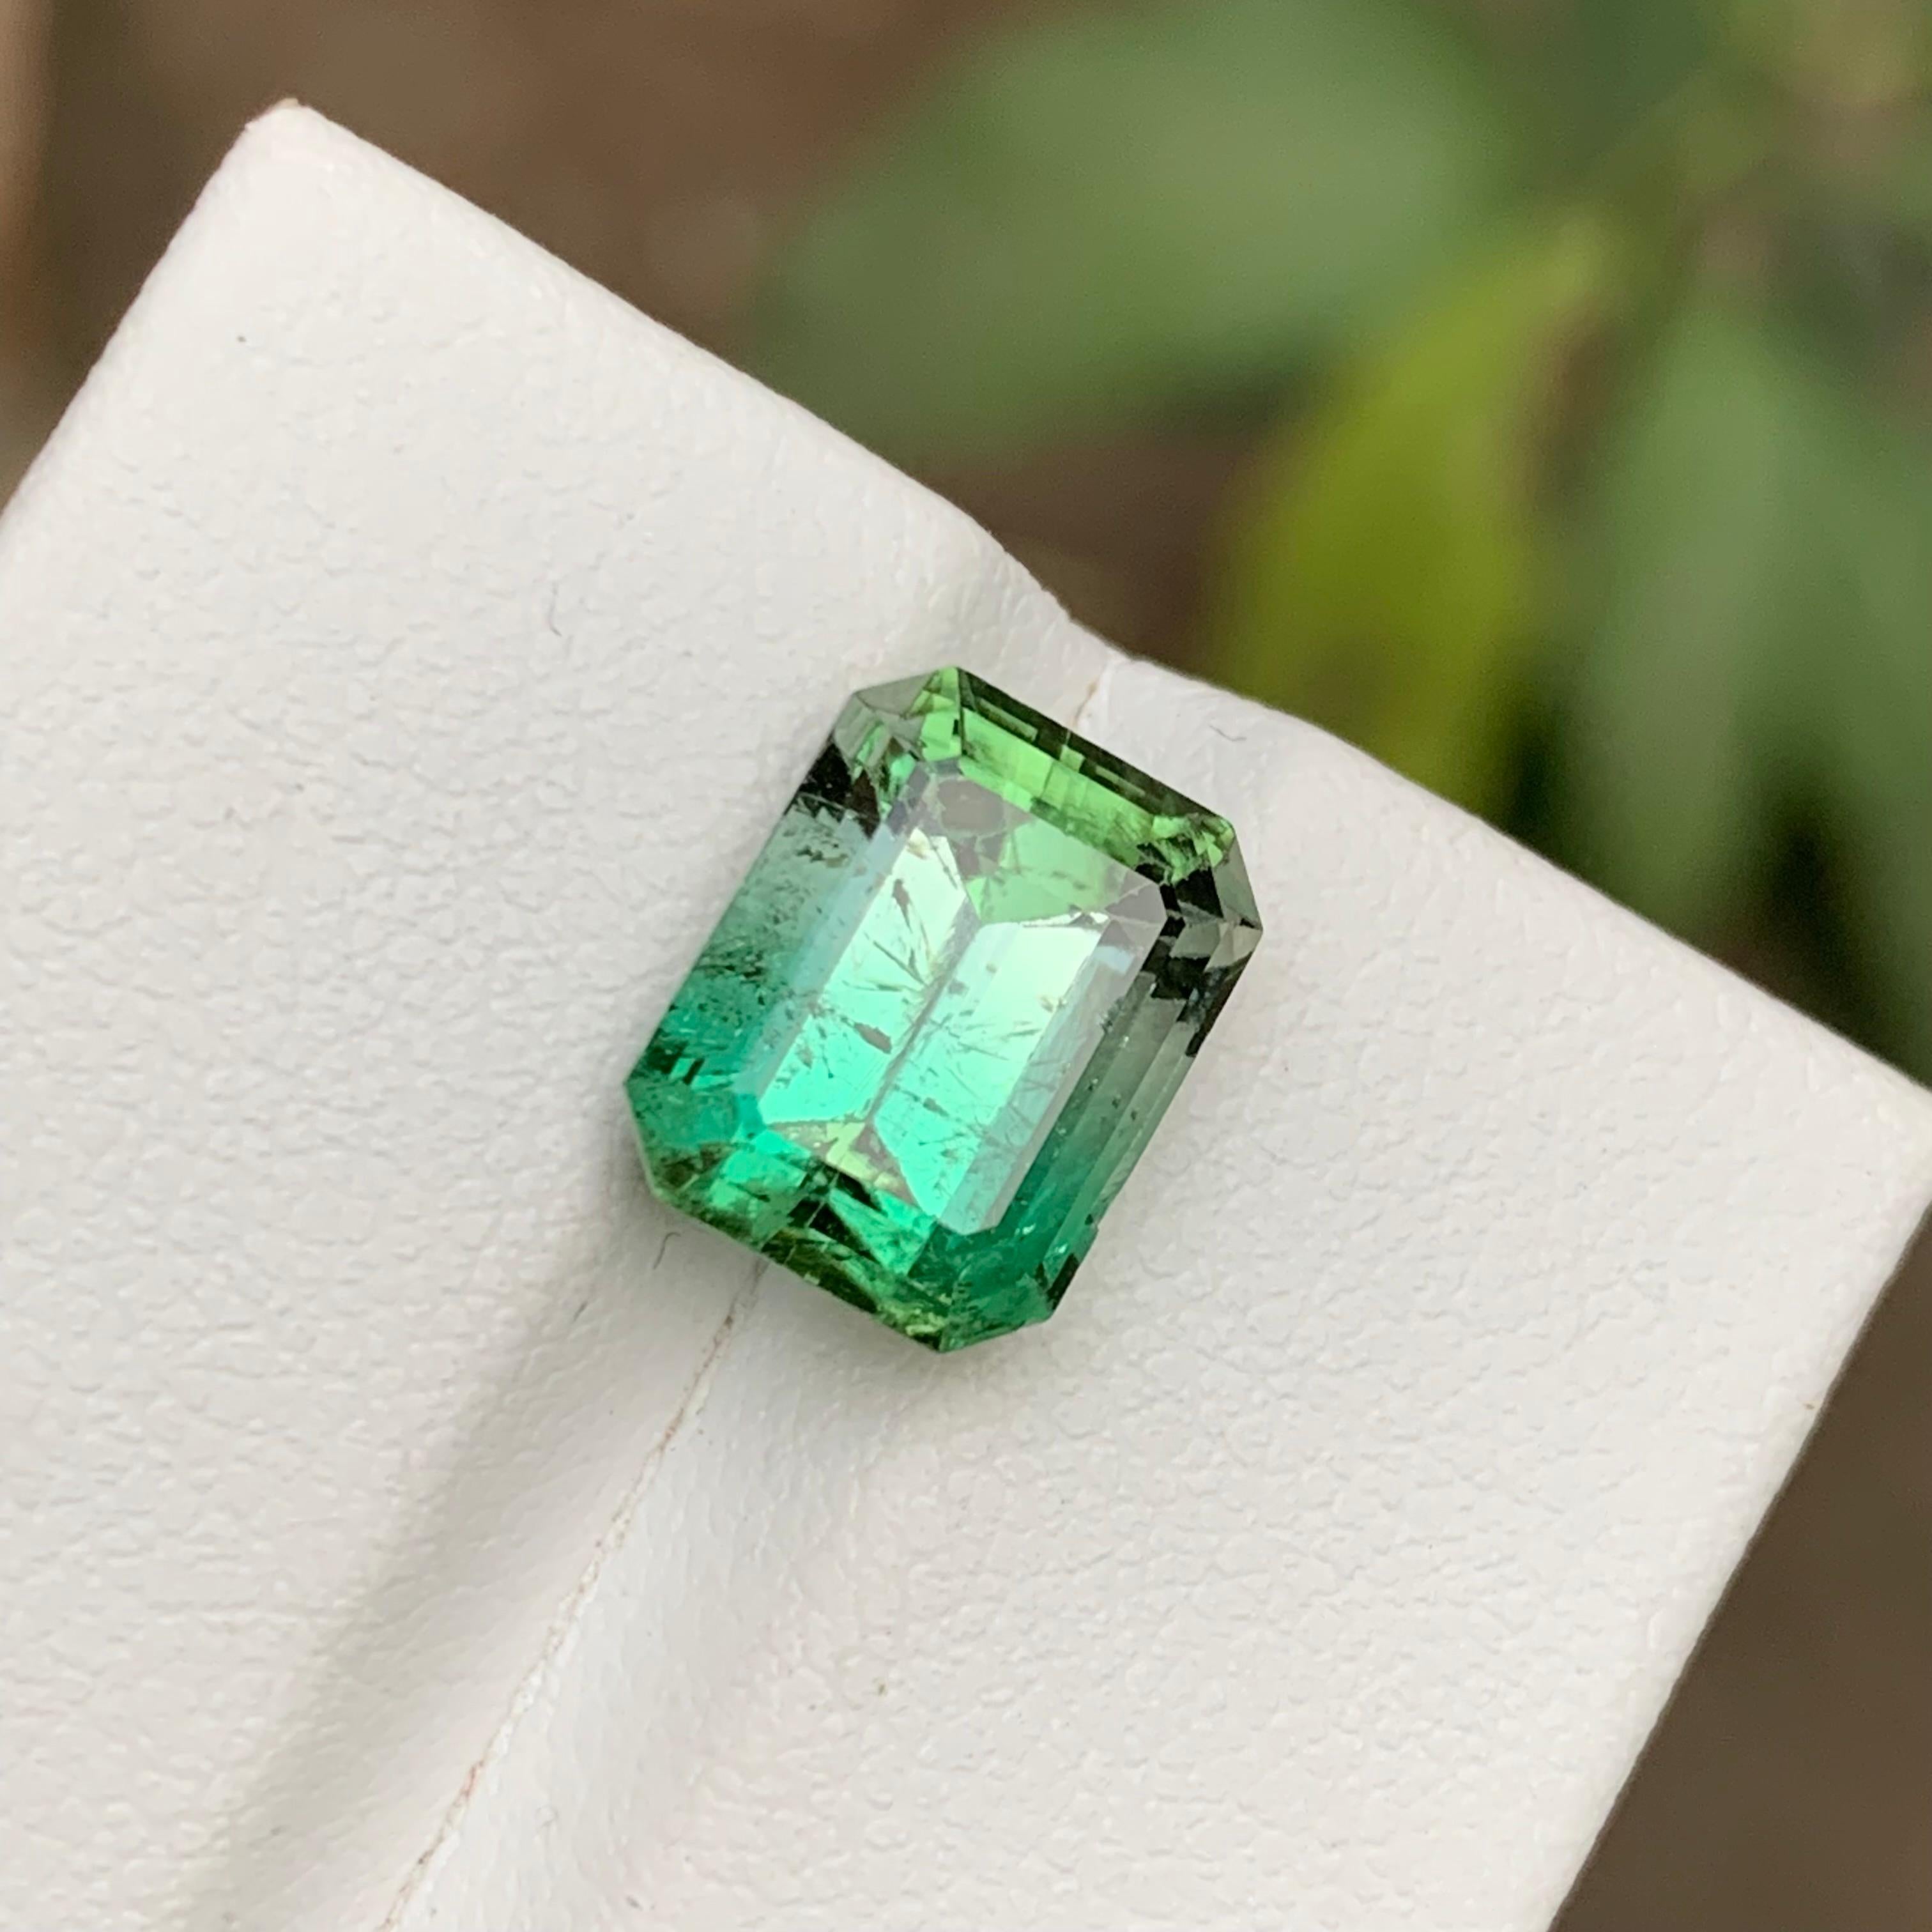 GEMSTONE TYPE: Tourmaline
PIECE(S): 1
WEIGHT: 5.40 Carats
SHAPE: Step Emerald Cut
SIZE (MM): 10.60 x 8.35 x 7.38
COLOR: Bicolor 
CLARITY: Moderately Included 
TREATMENT: None
ORIGIN: Afghanistan
CERTIFICATE: On demand

Truly exquisite 5.40 Carats